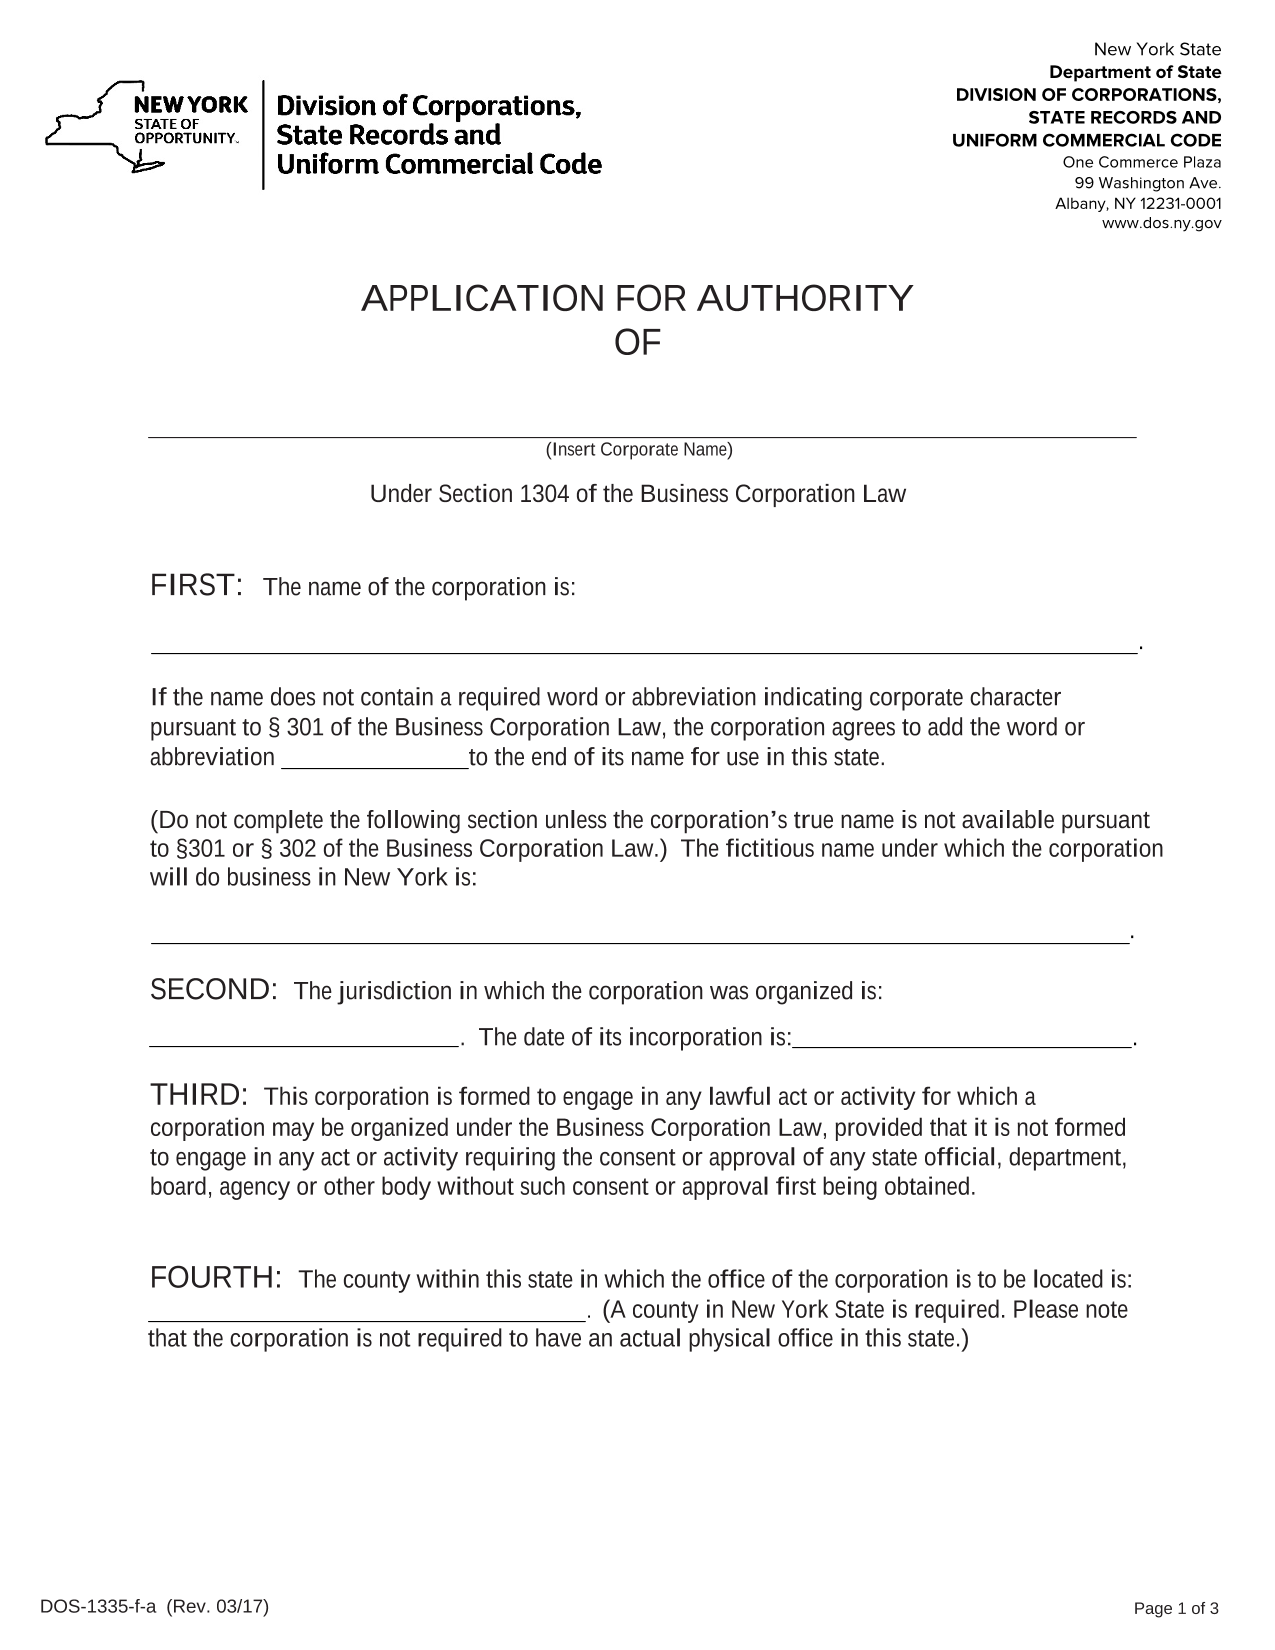 new-york-foreign-corporation-application-for-authority